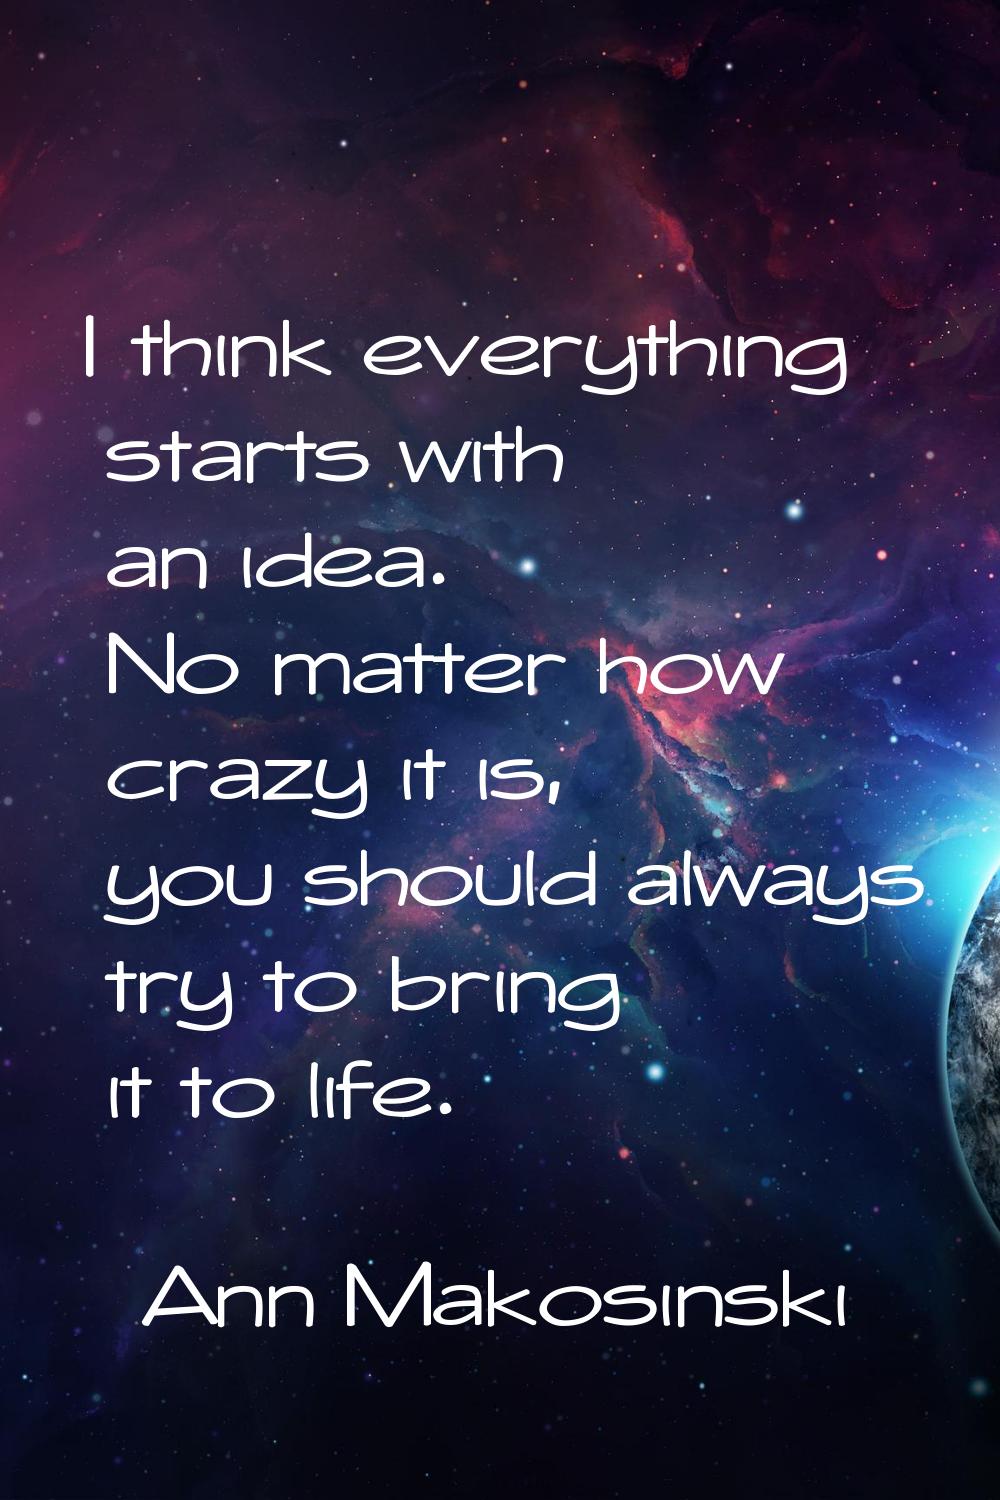 I think everything starts with an idea. No matter how crazy it is, you should always try to bring i